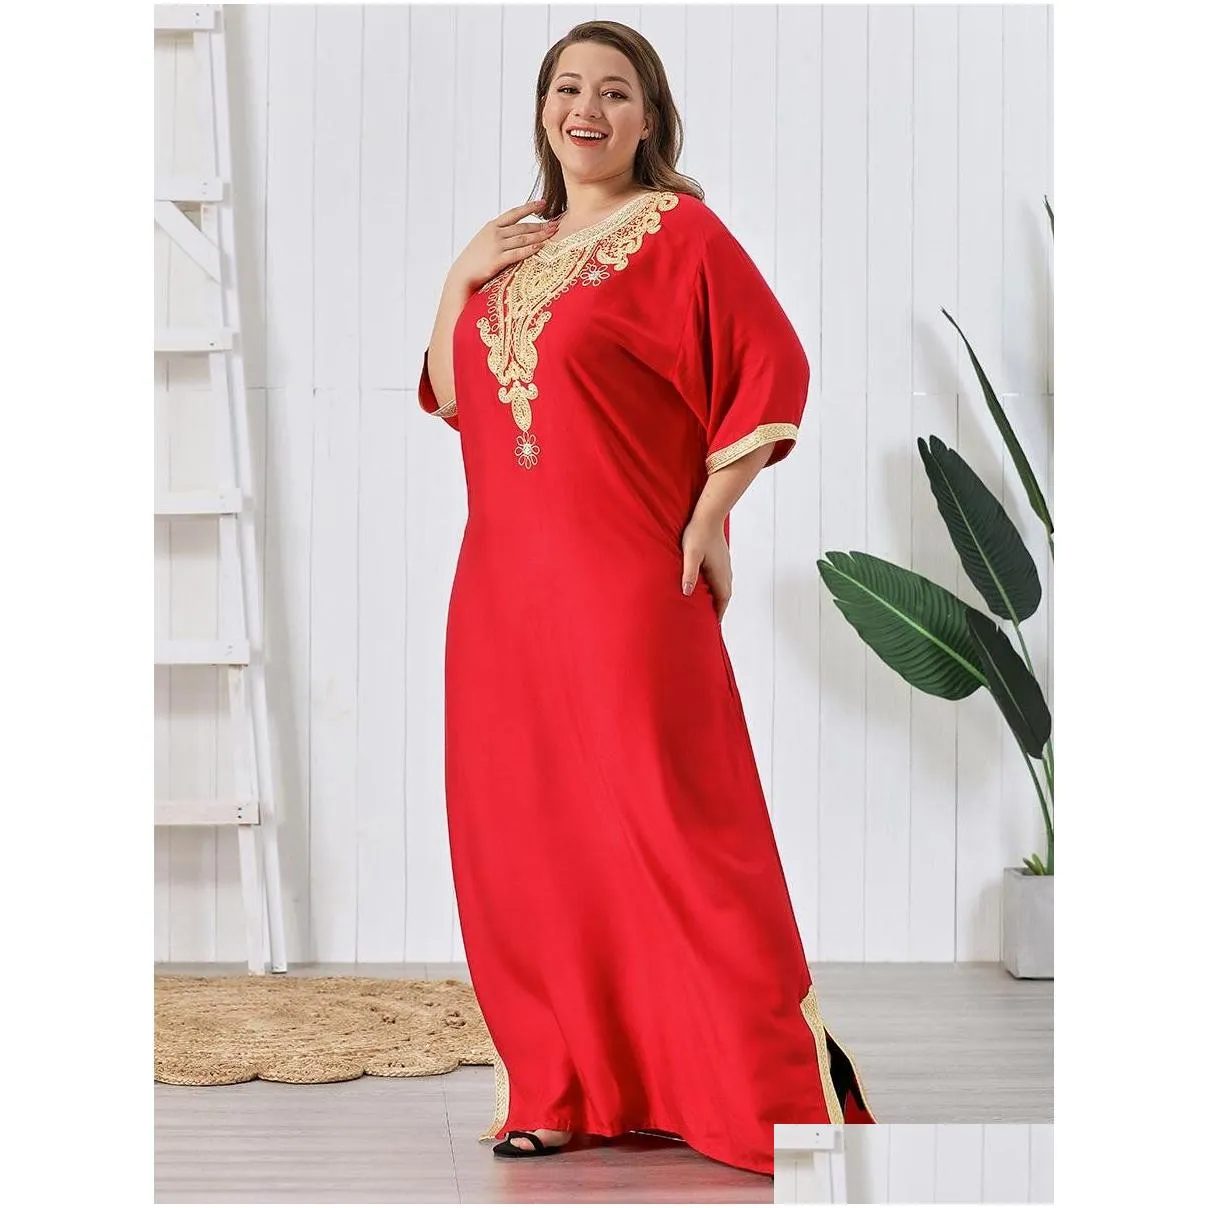 plus Size Vintage Rhinestes Embroidered Muslim Dr Women Oversized Short Sleeves Lg Dres Middle East Arabian Robe Cloth j1ce#